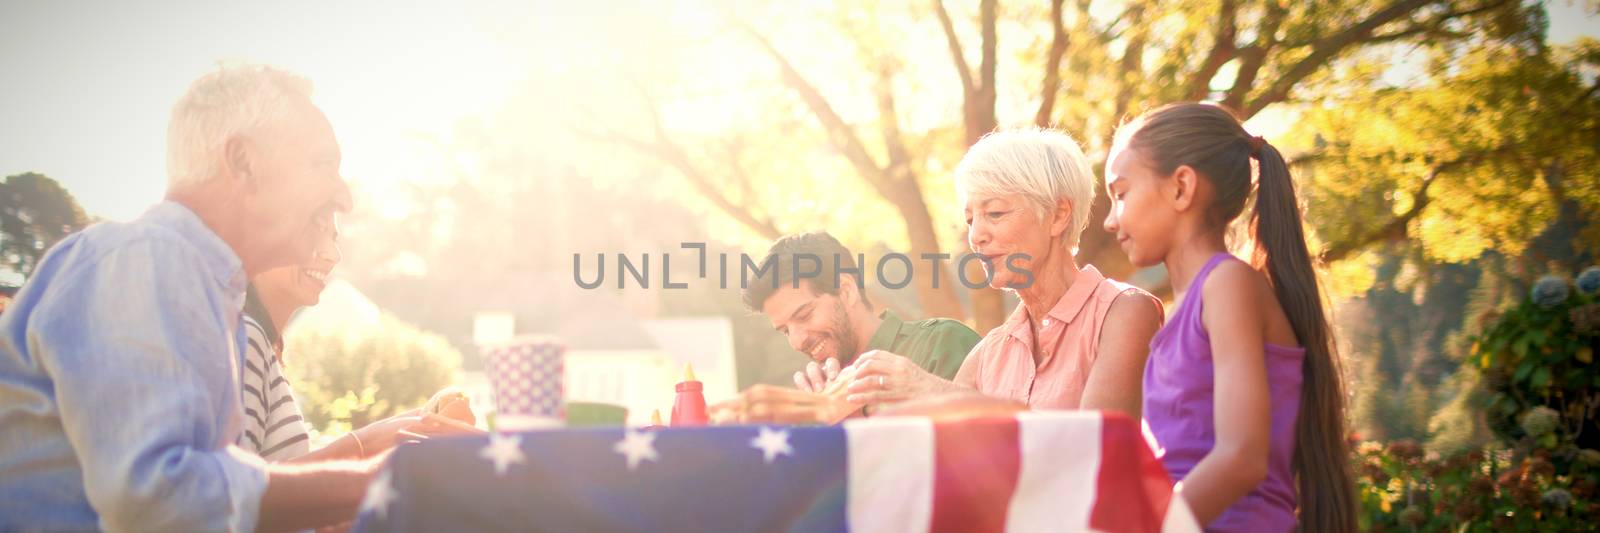 Happy family having a picnic on an american tableclothe